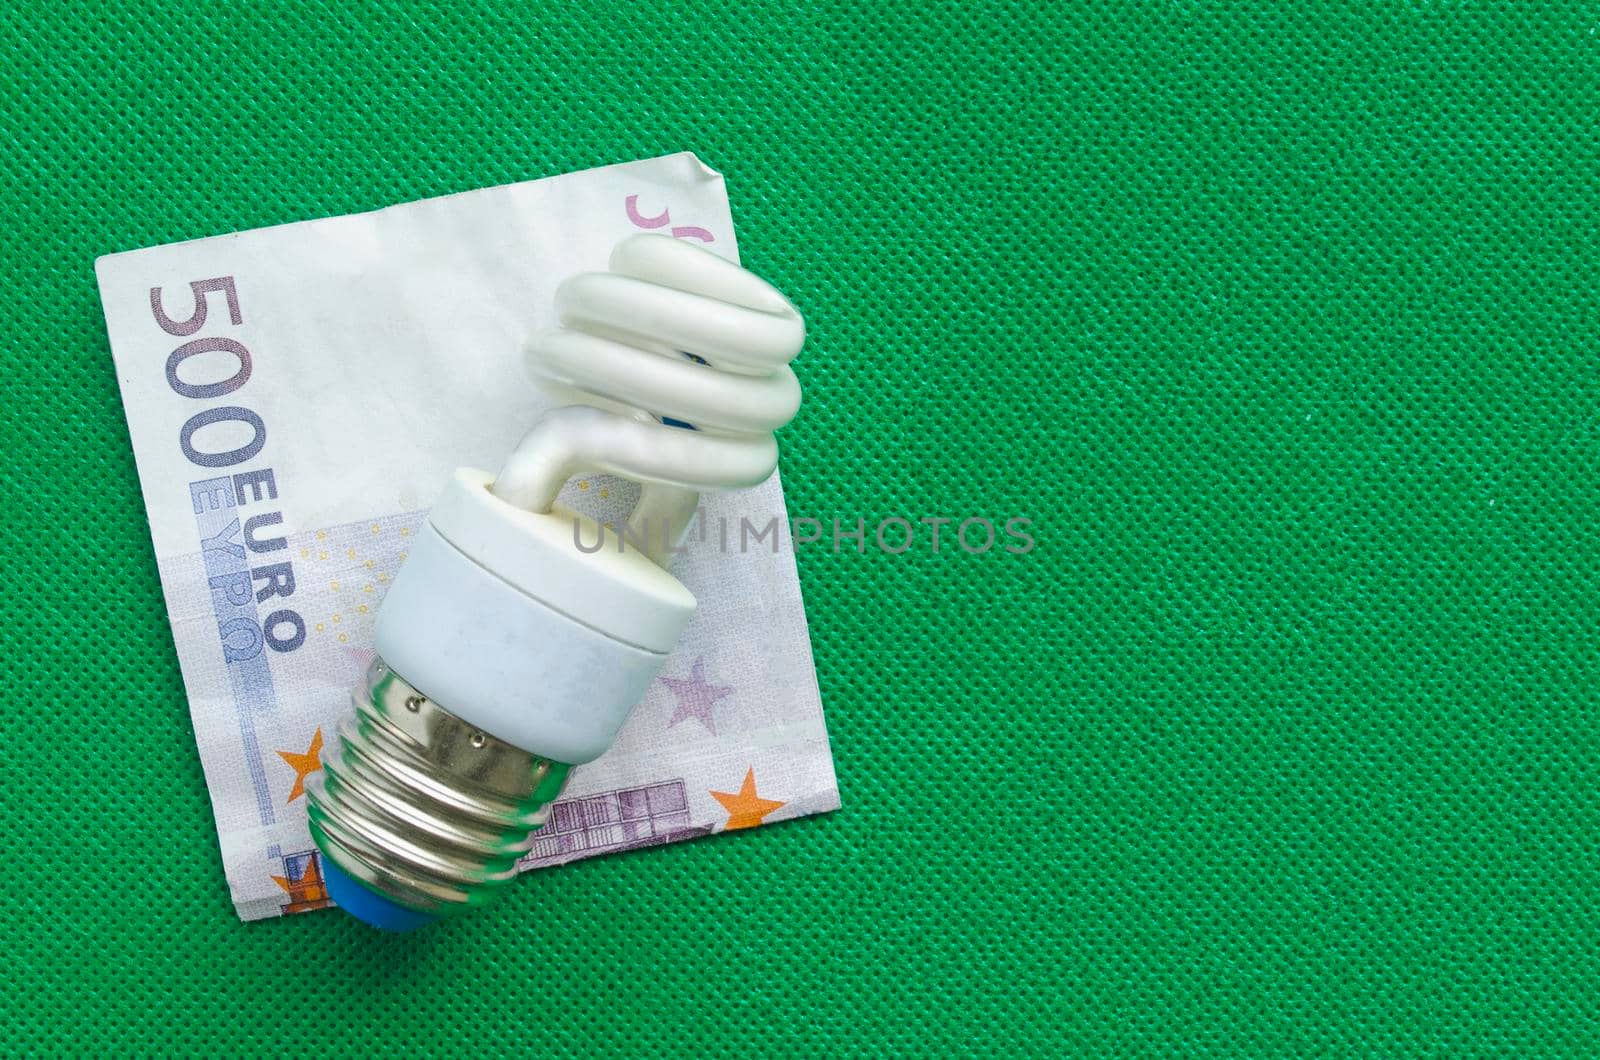 Energy-saving lamp and euro banknote on green background, copyspace.The concept of saving money in energy saving.